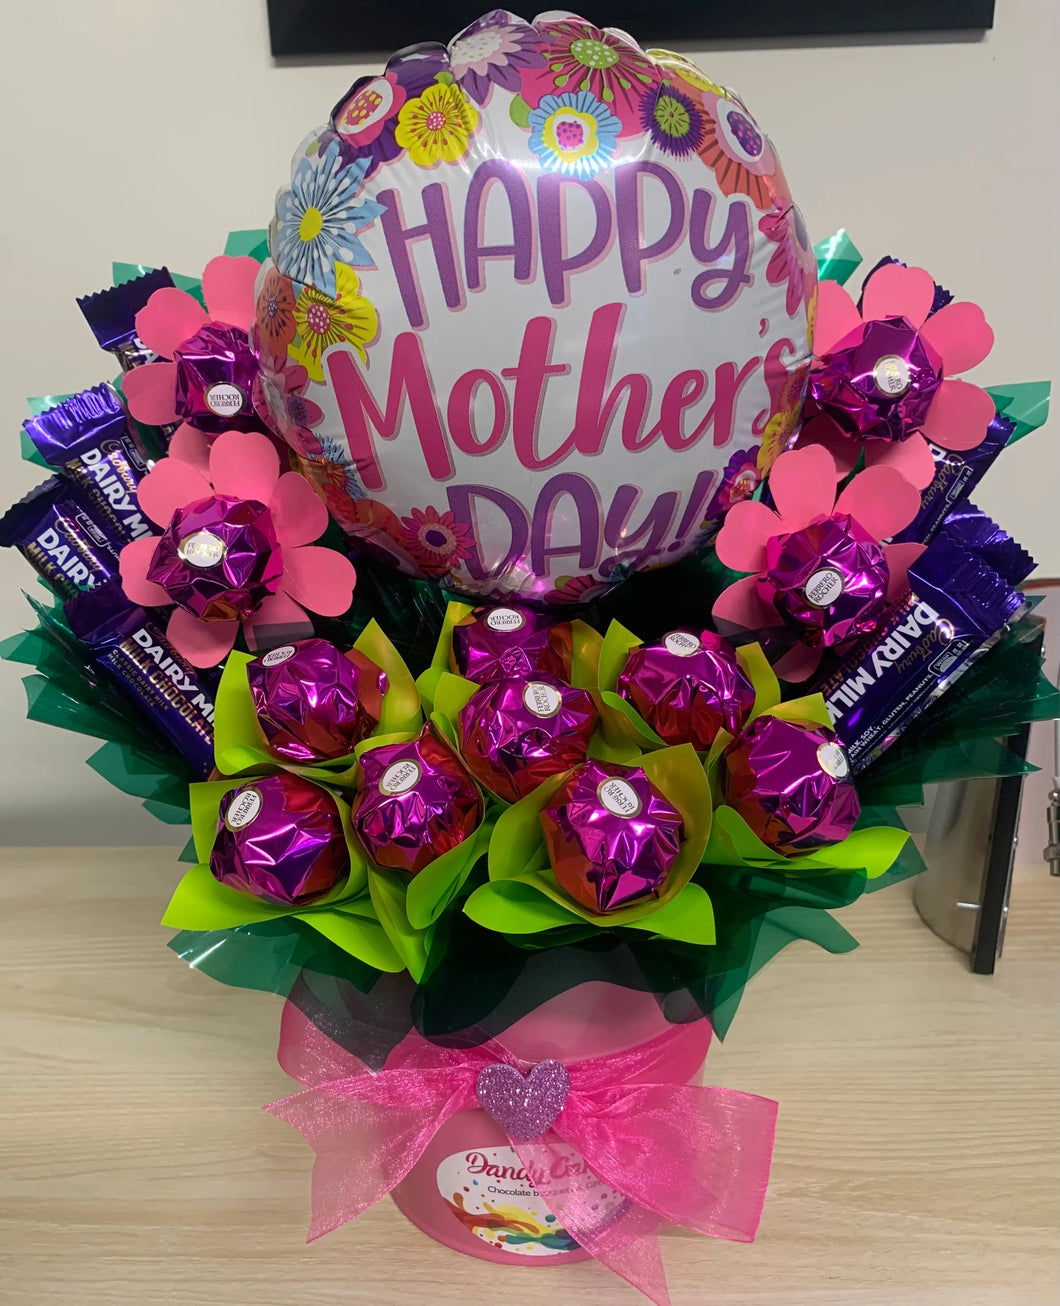 Happy Mother’s Day bouquet - Image #1